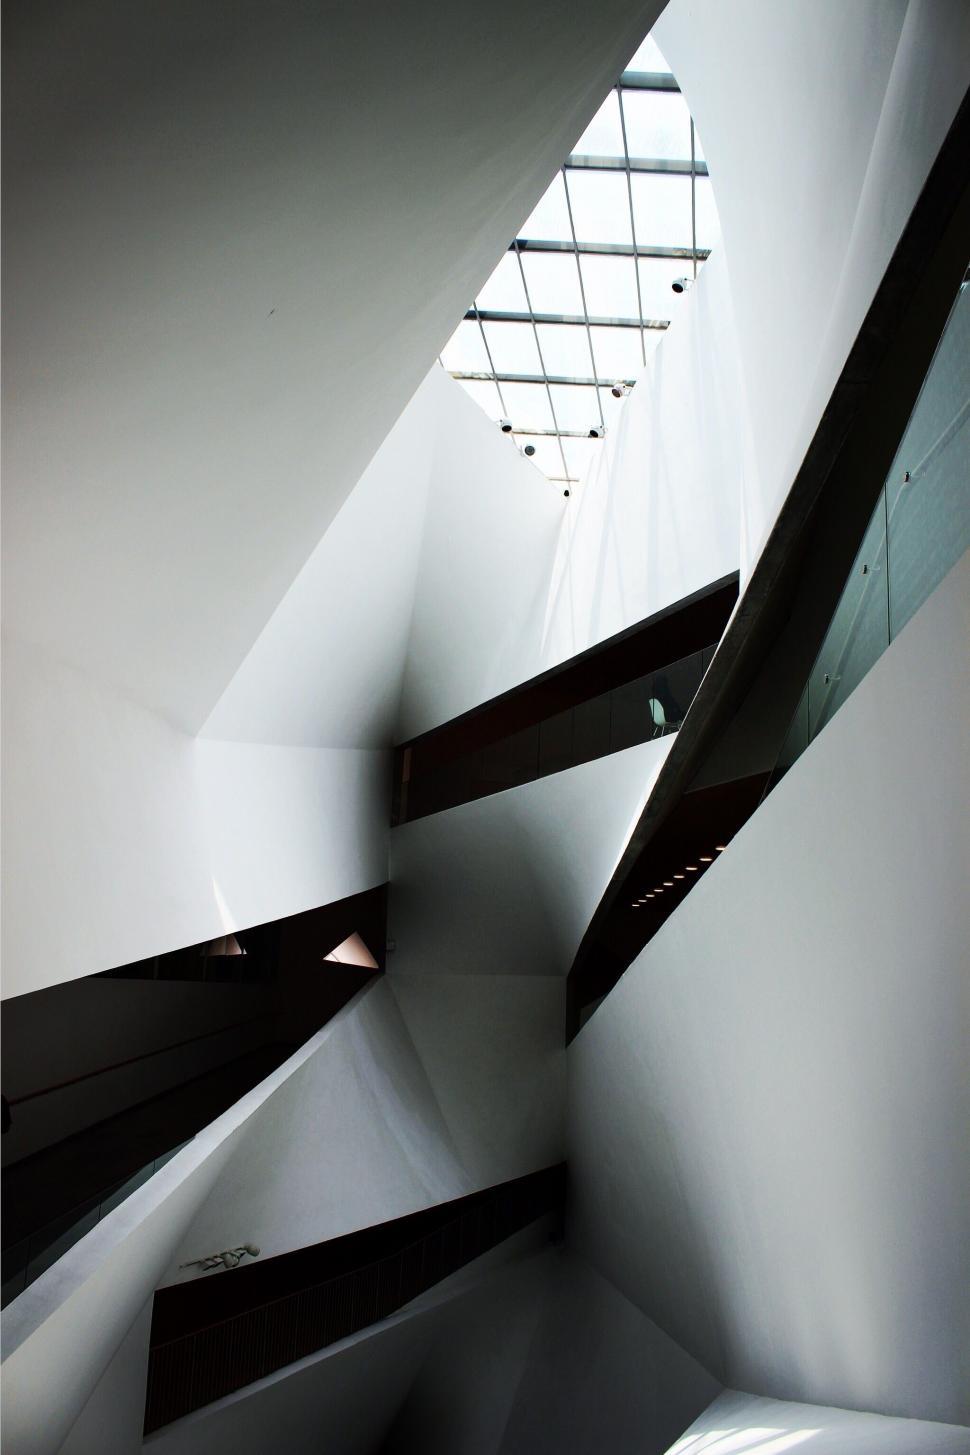 Free Image of Black and White Staircase Leading Up 